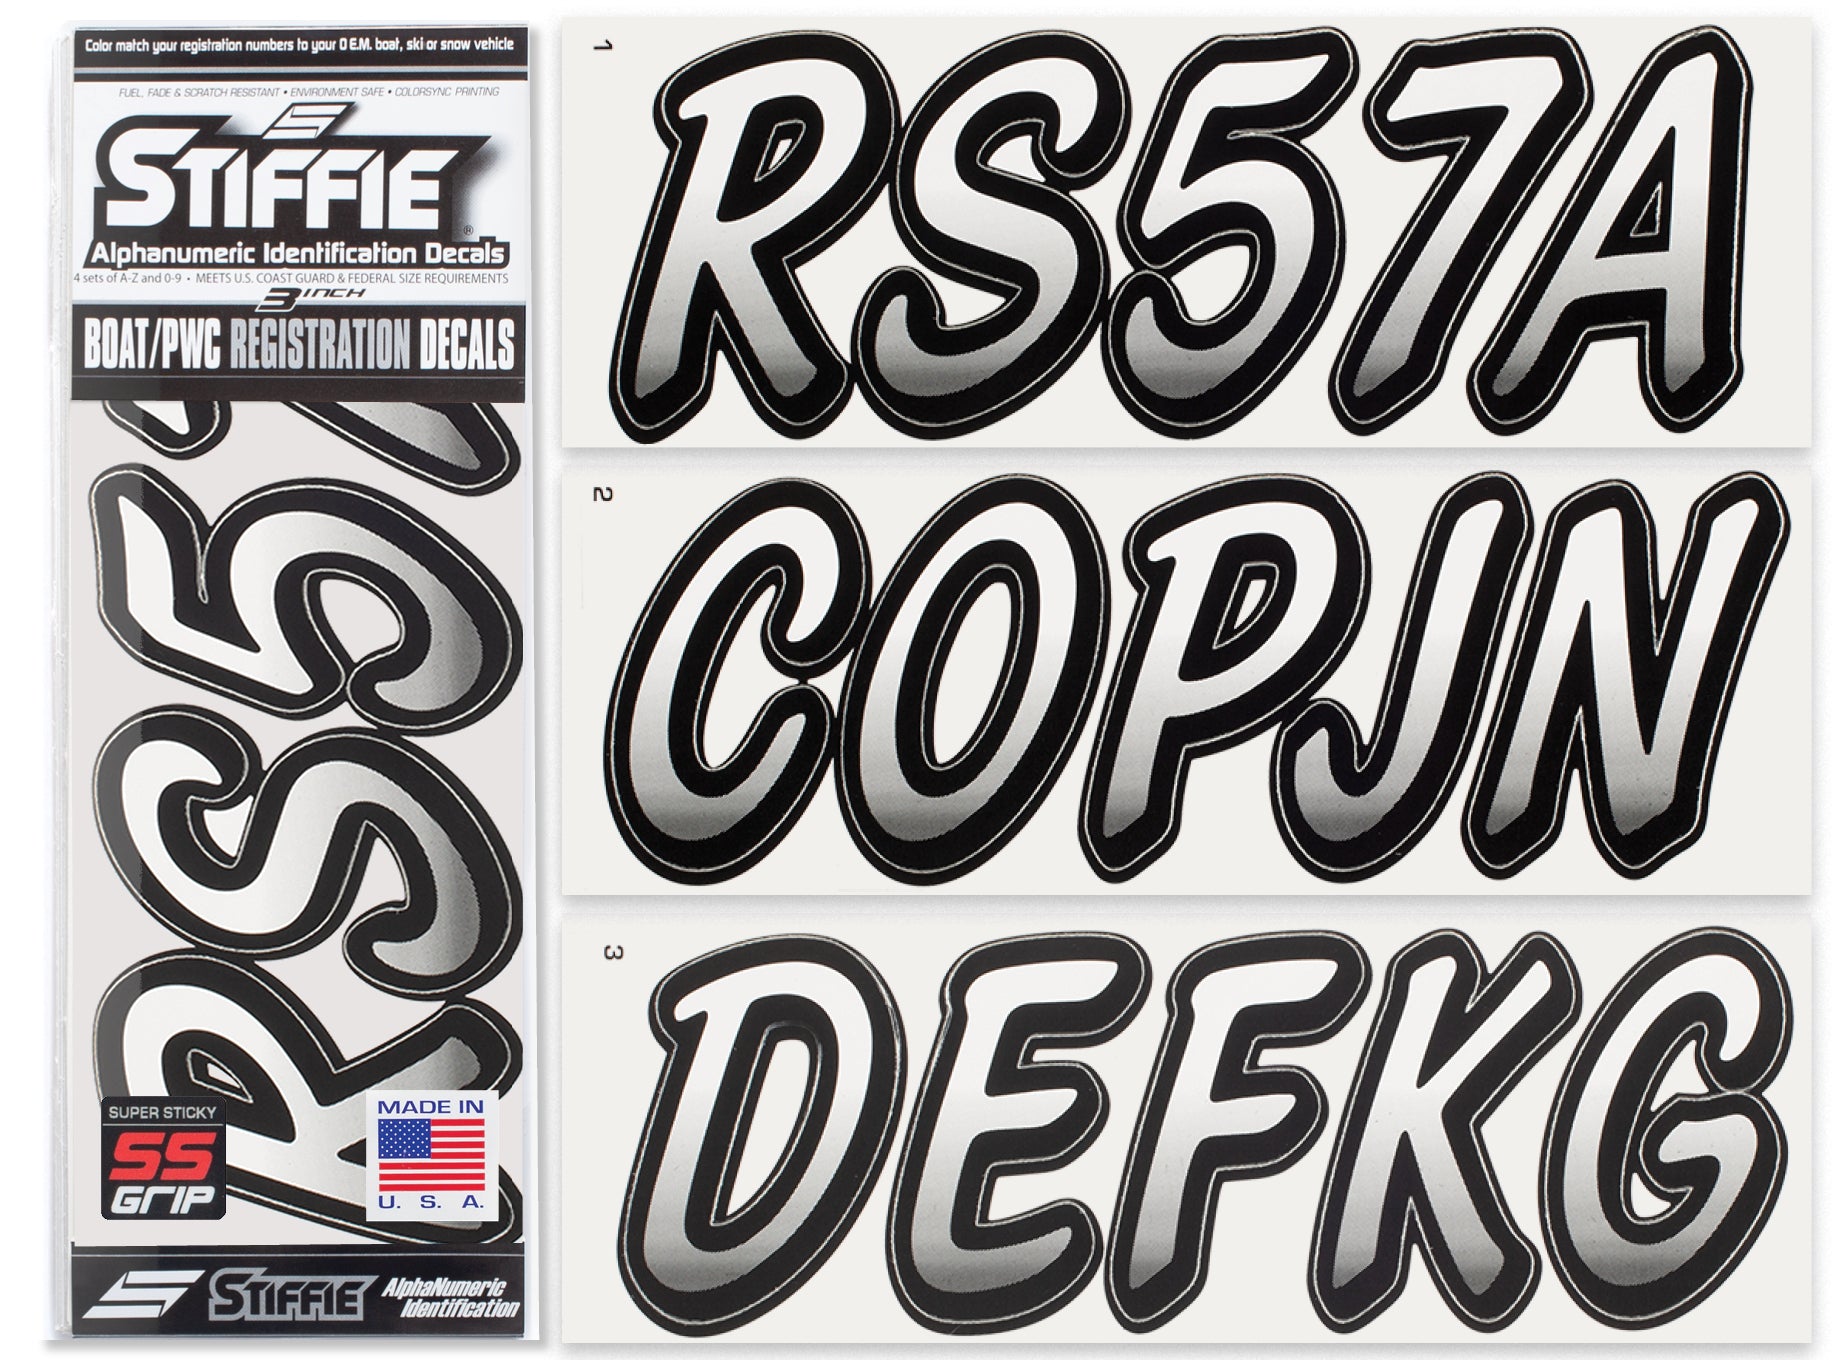 STIFFIE Whipline White/Black Super Sticky 3" Alpha Numeric Registration Identification Numbers Stickers Decals for Sea-Doo Spark, Inflatable Boats, Ribs, Hypalon/PVC, PWC and Boats.…